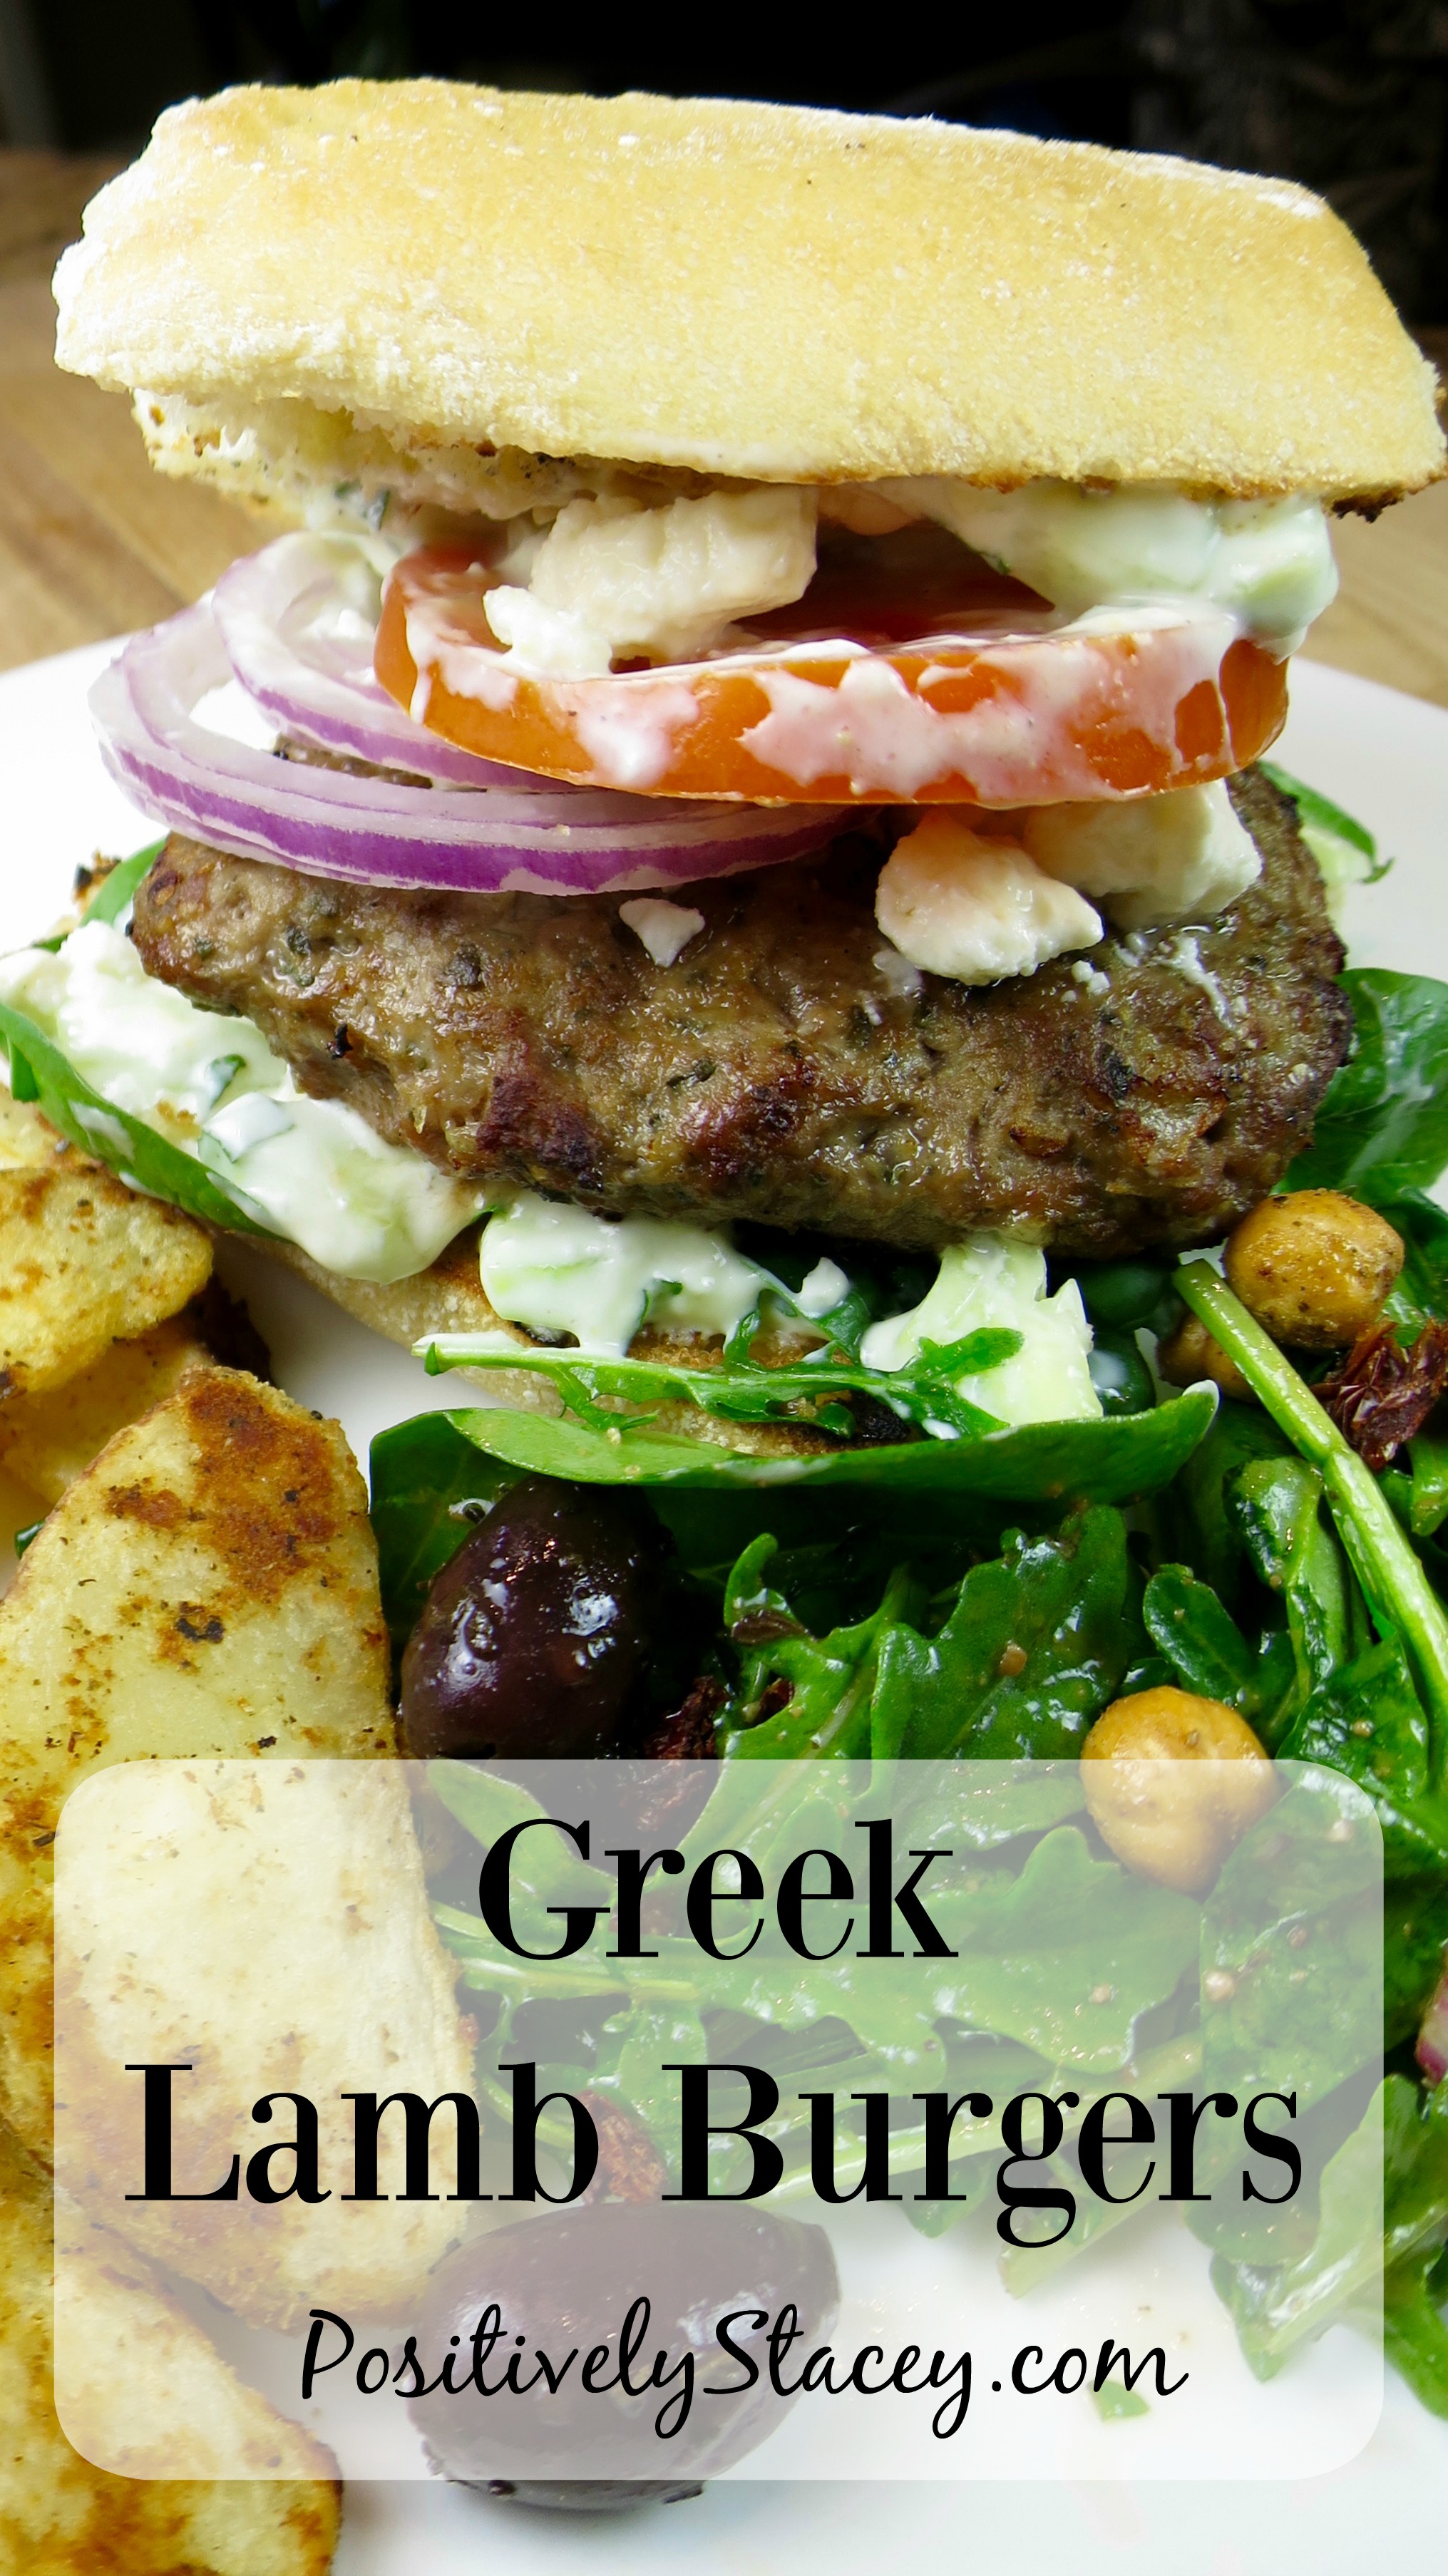 This recipe is full of flavor! The lamb is mixed with mint, onion, and loads of Mediterranean goodness. Greek Lamb Burger Recipe - Delicious!